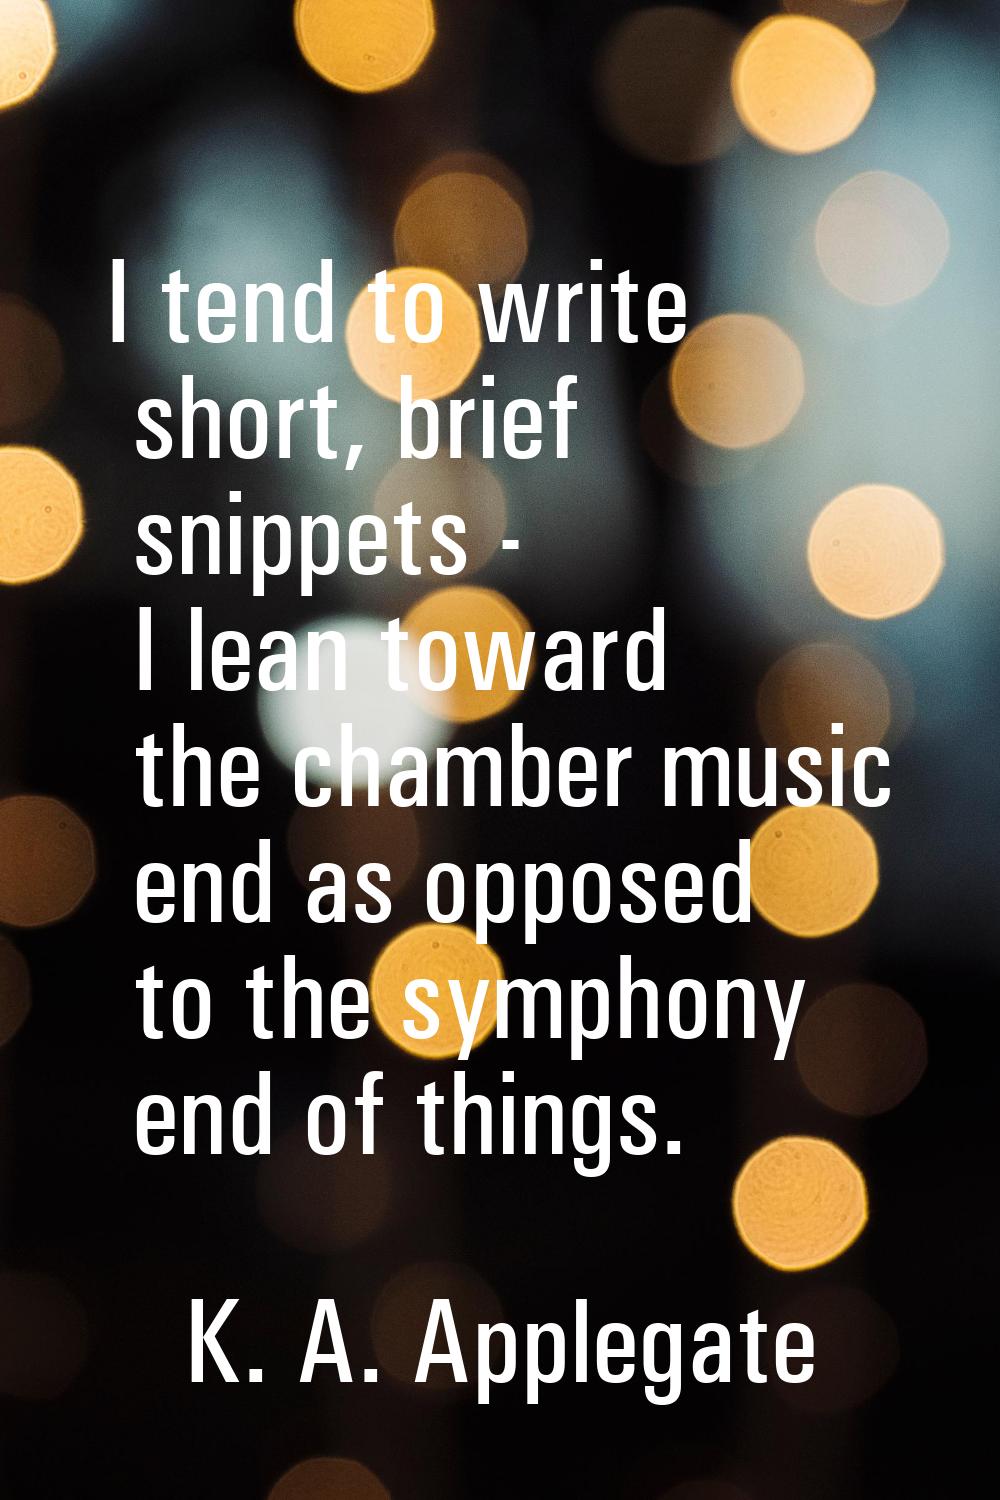 I tend to write short, brief snippets - I lean toward the chamber music end as opposed to the symph